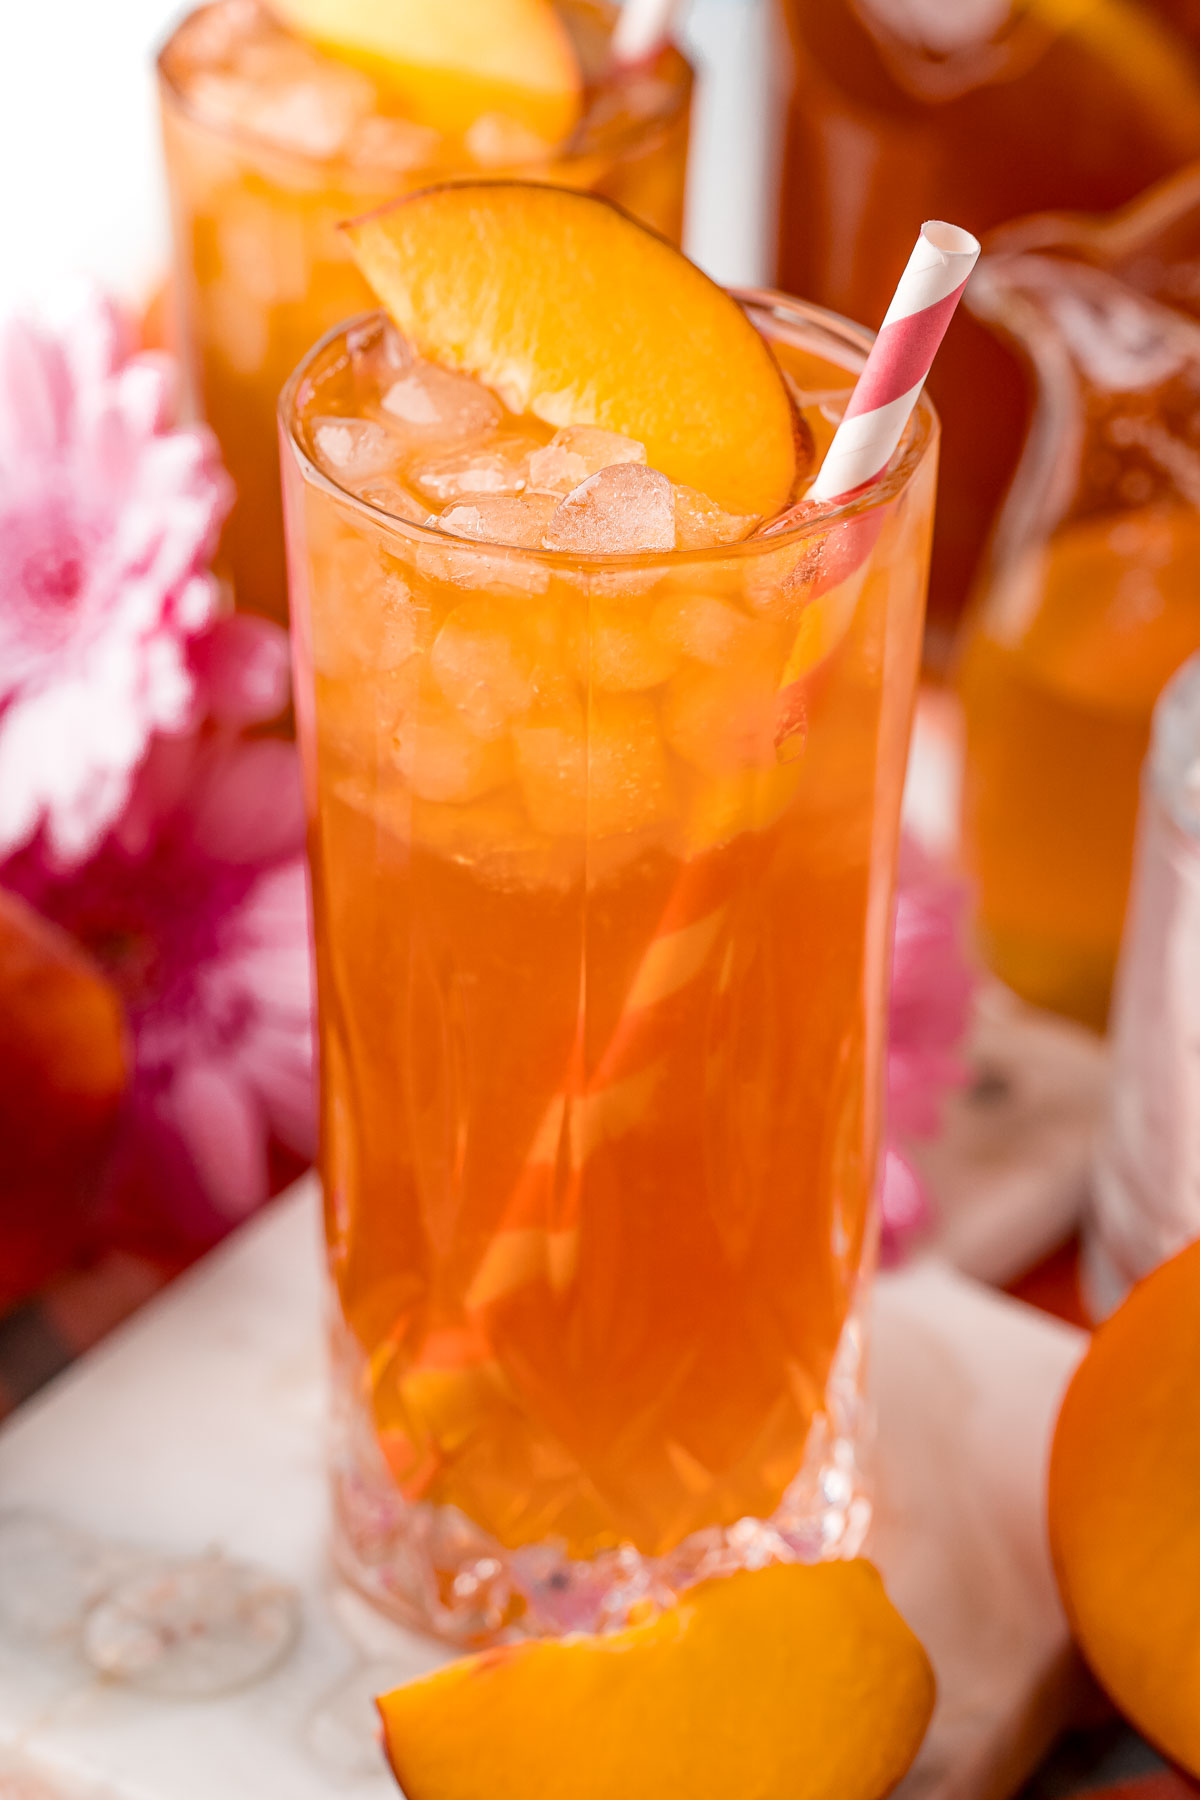 Close up photo of a glass with iced peach tea in it with another glass in the background.